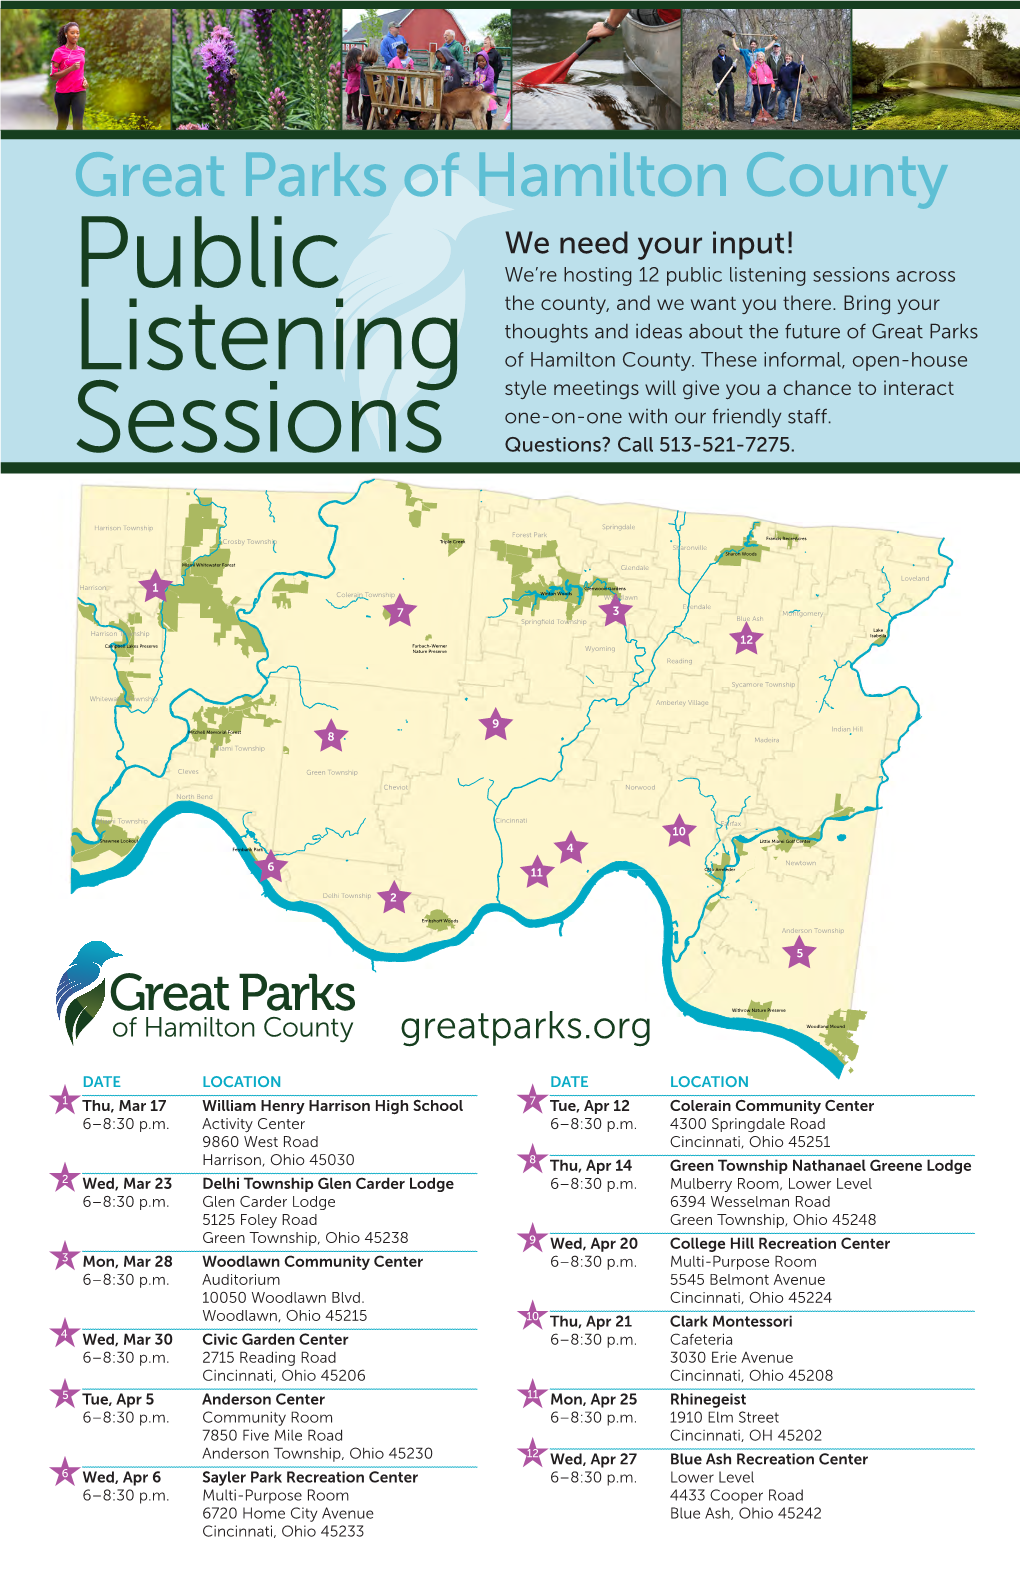 Great Parks of Hamilton County We Need Your Input! Public We’Re Hosting 12 Public Listening Sessions Across the County, and We Want You There